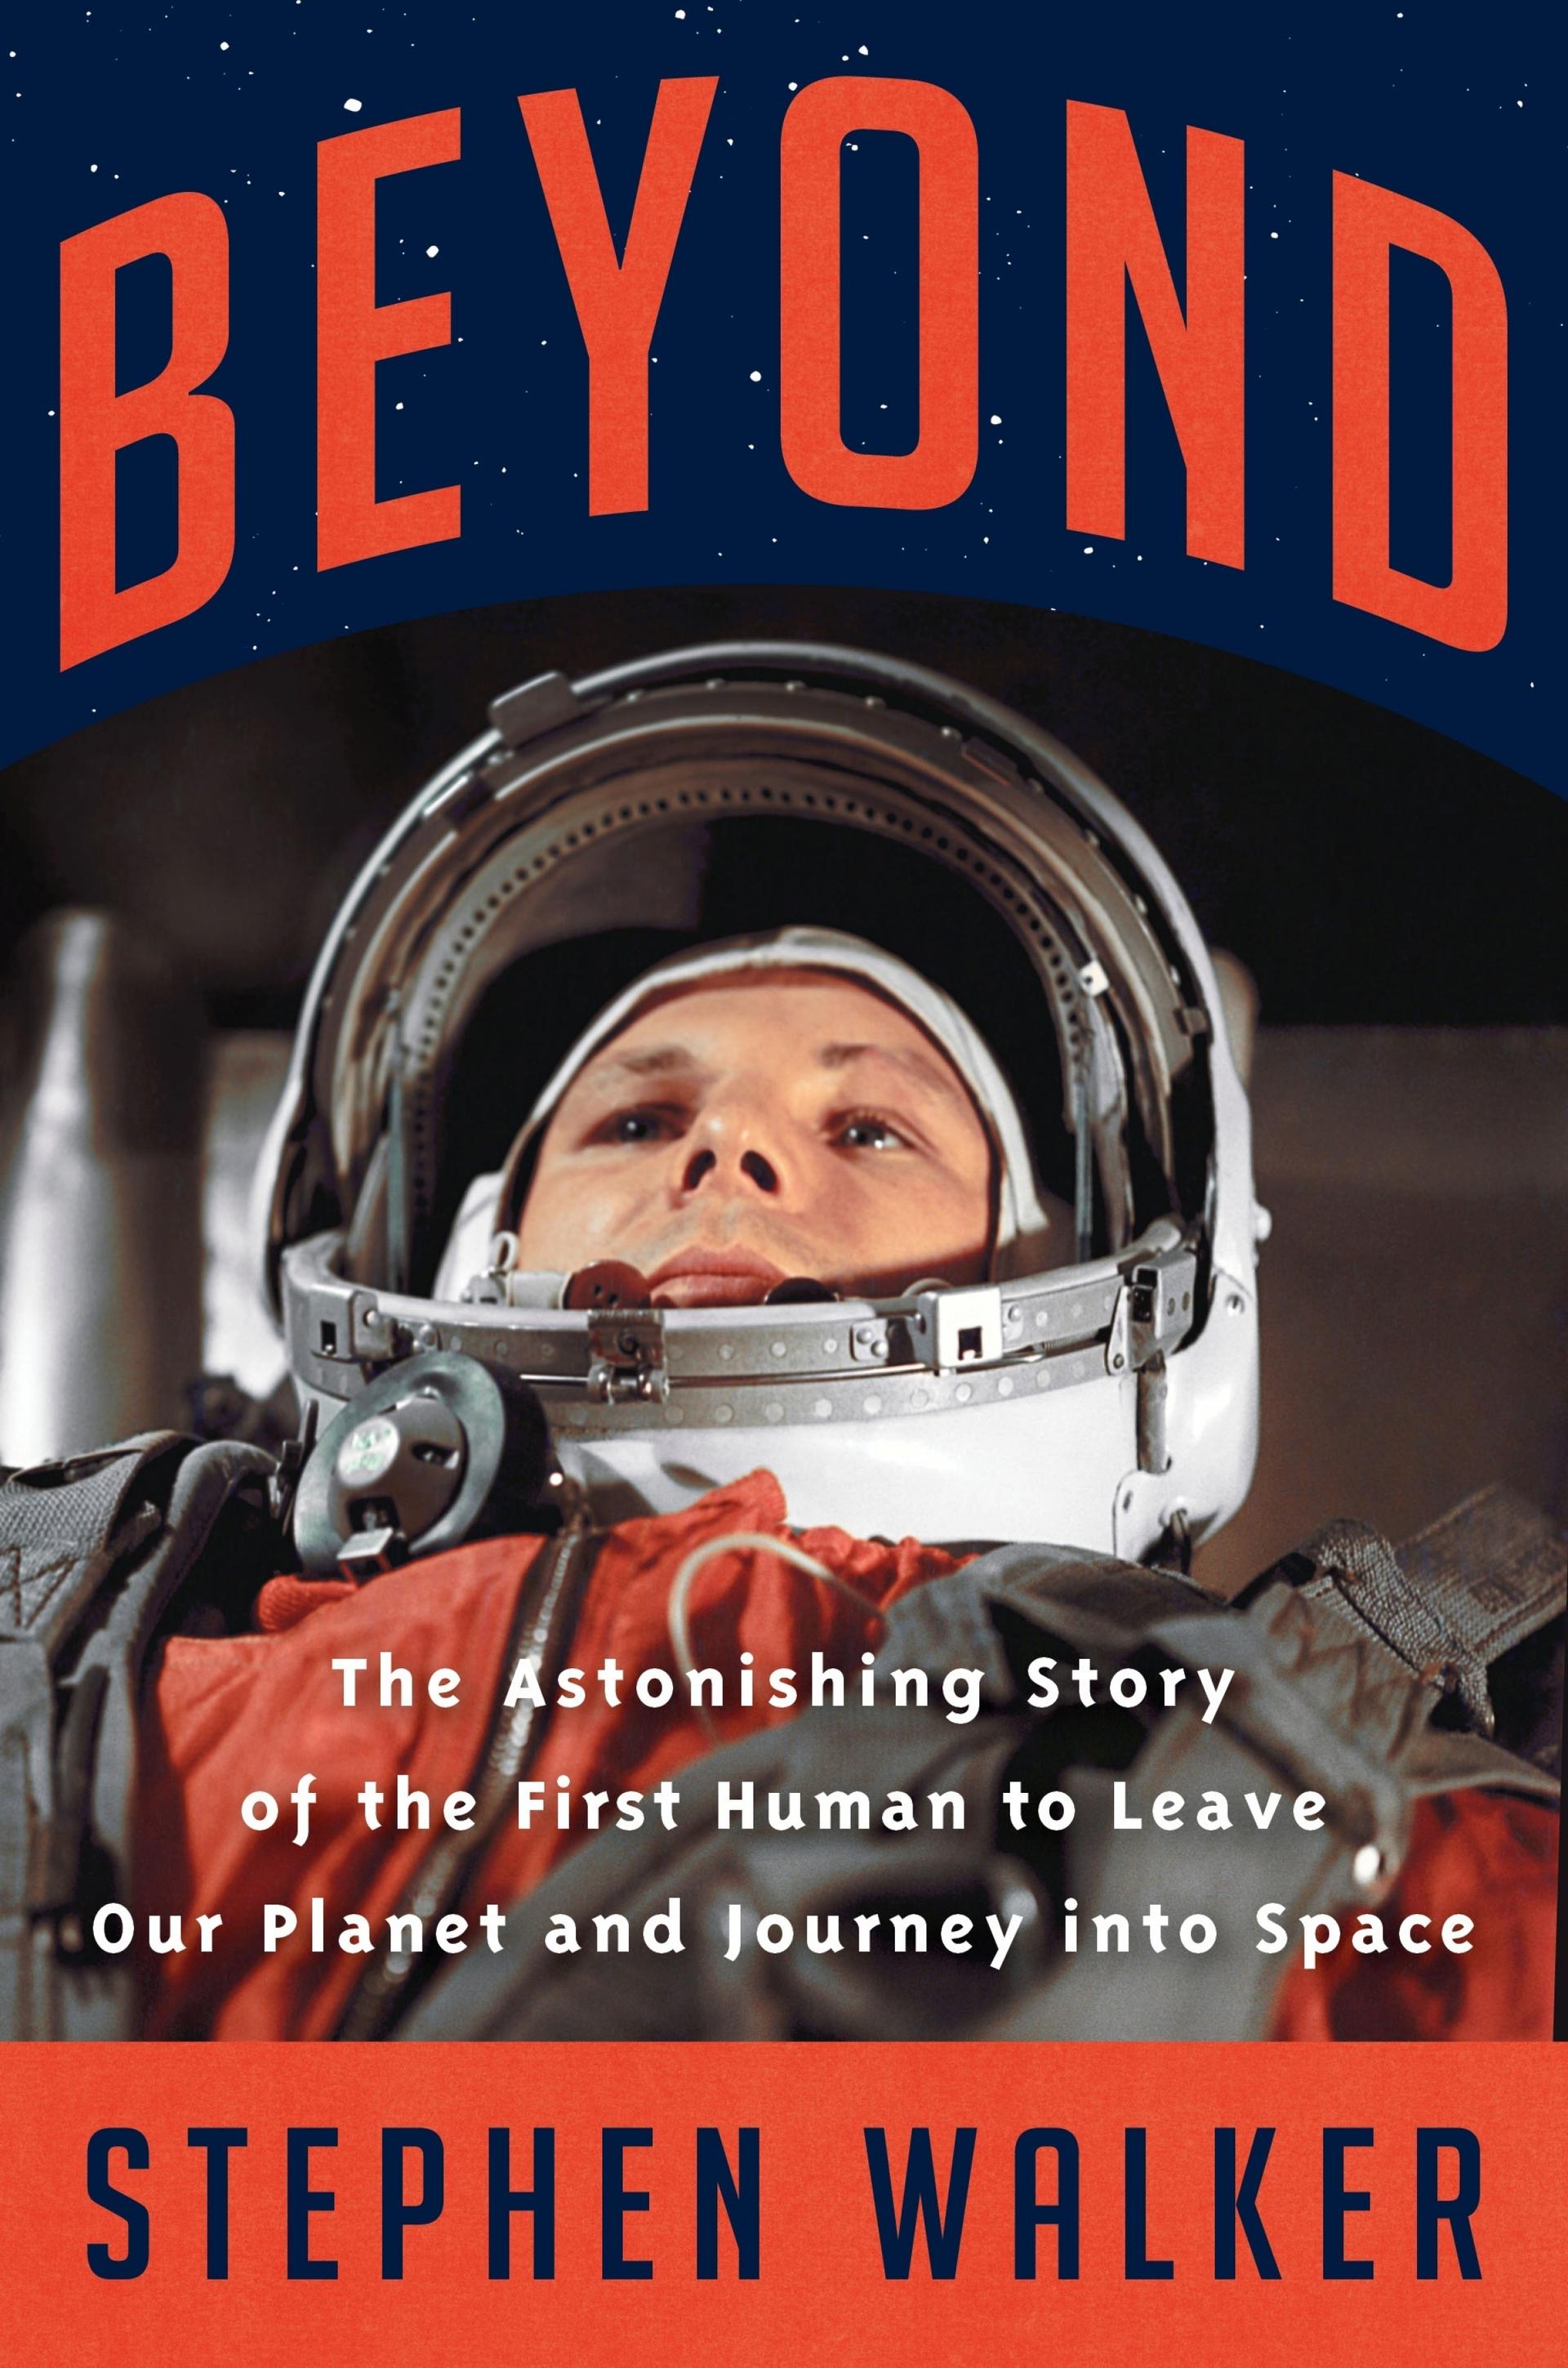 Cover of Stephen Walker's book "Beyond" with picture of cosmonaut Yuri Gagarin